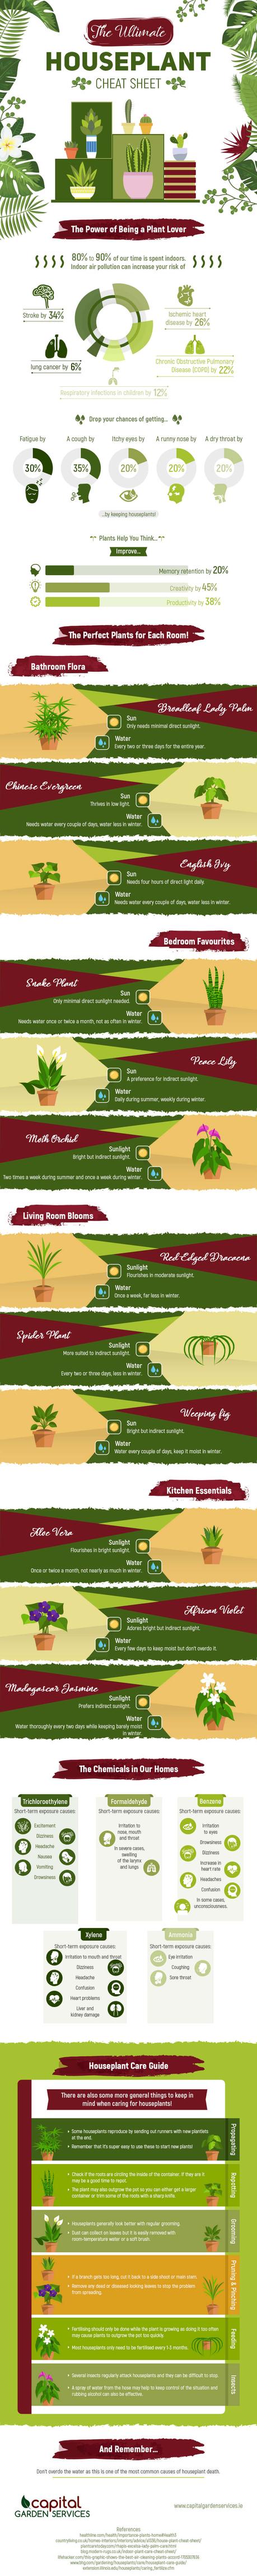 Infographic – The Ultimate Houseplant Cheat Sheet